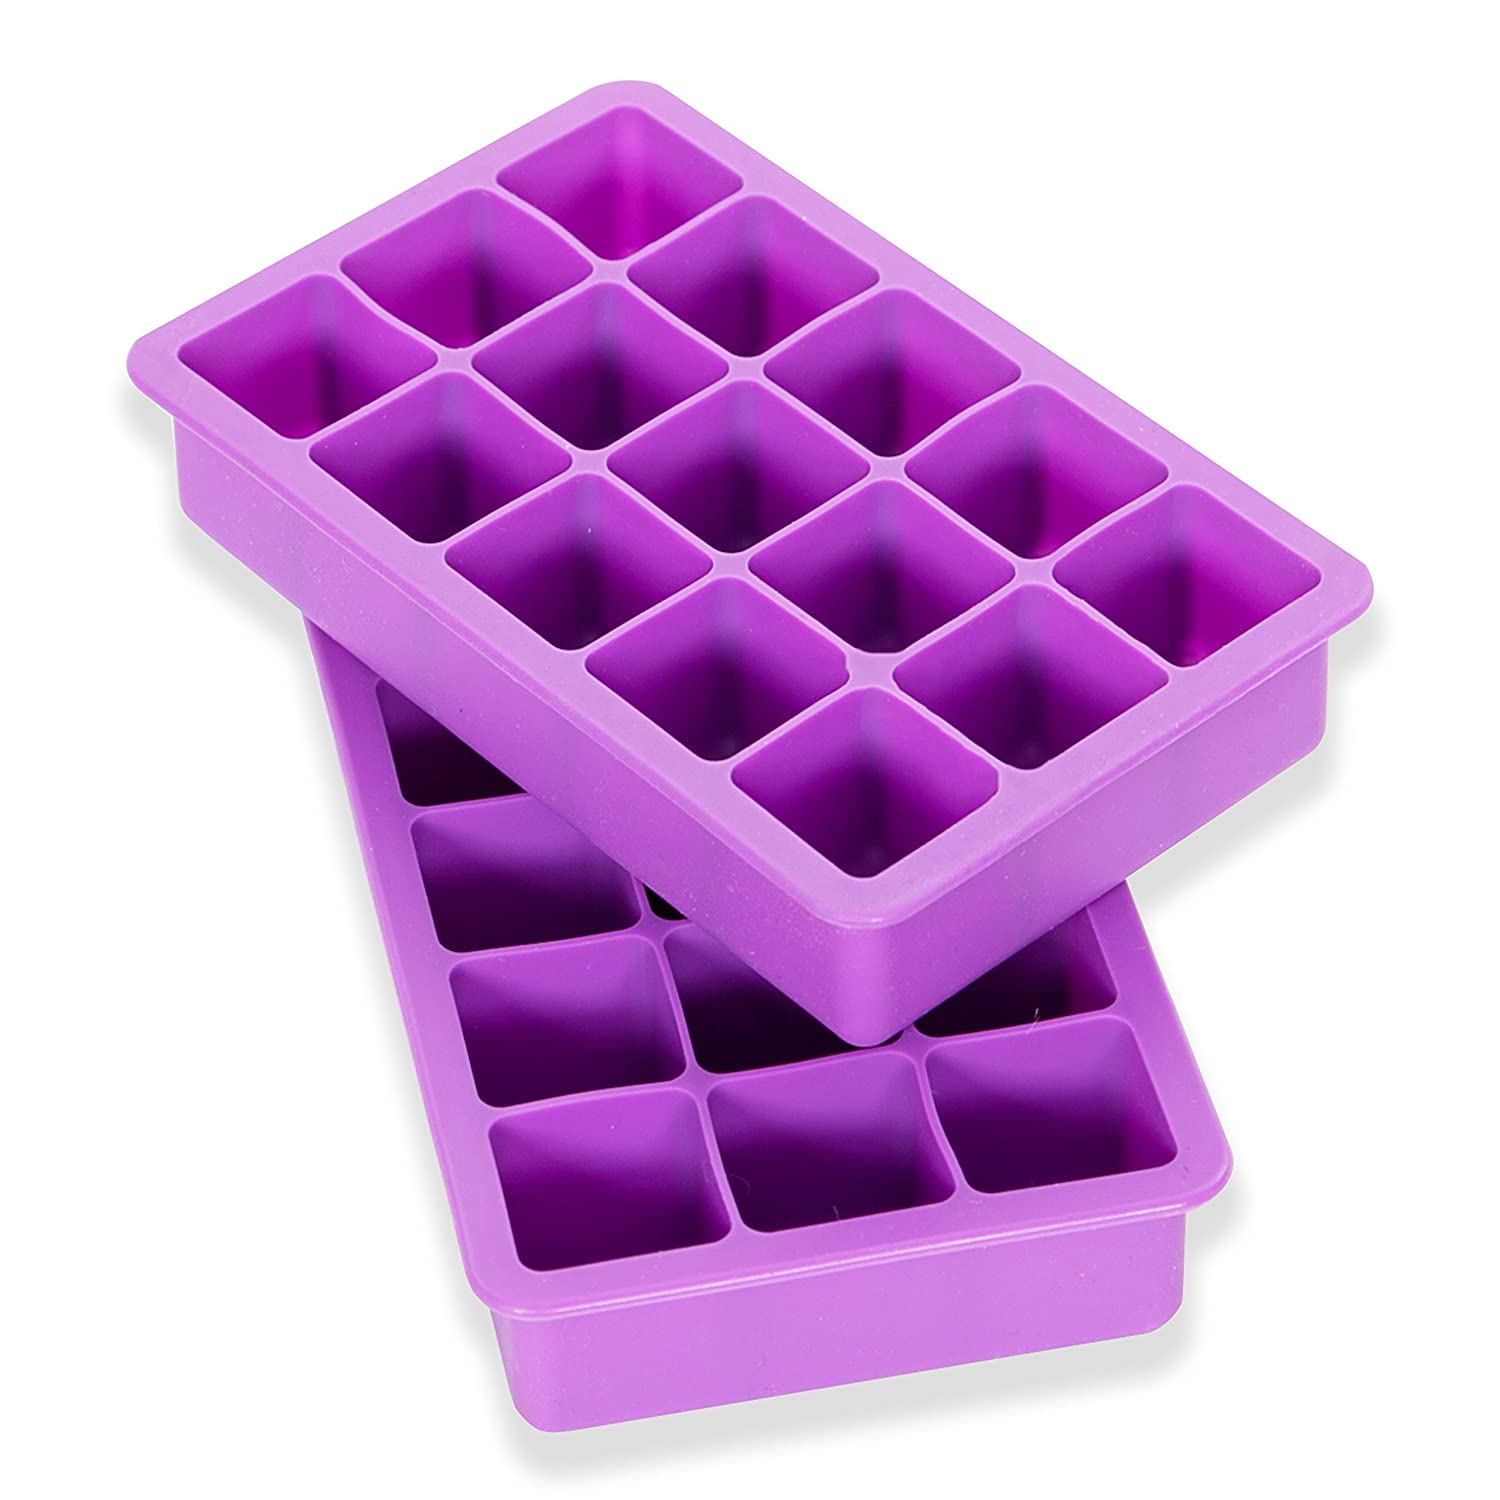 Elbee Home 613 Silicone Ice Cube Trays, 2-Pack